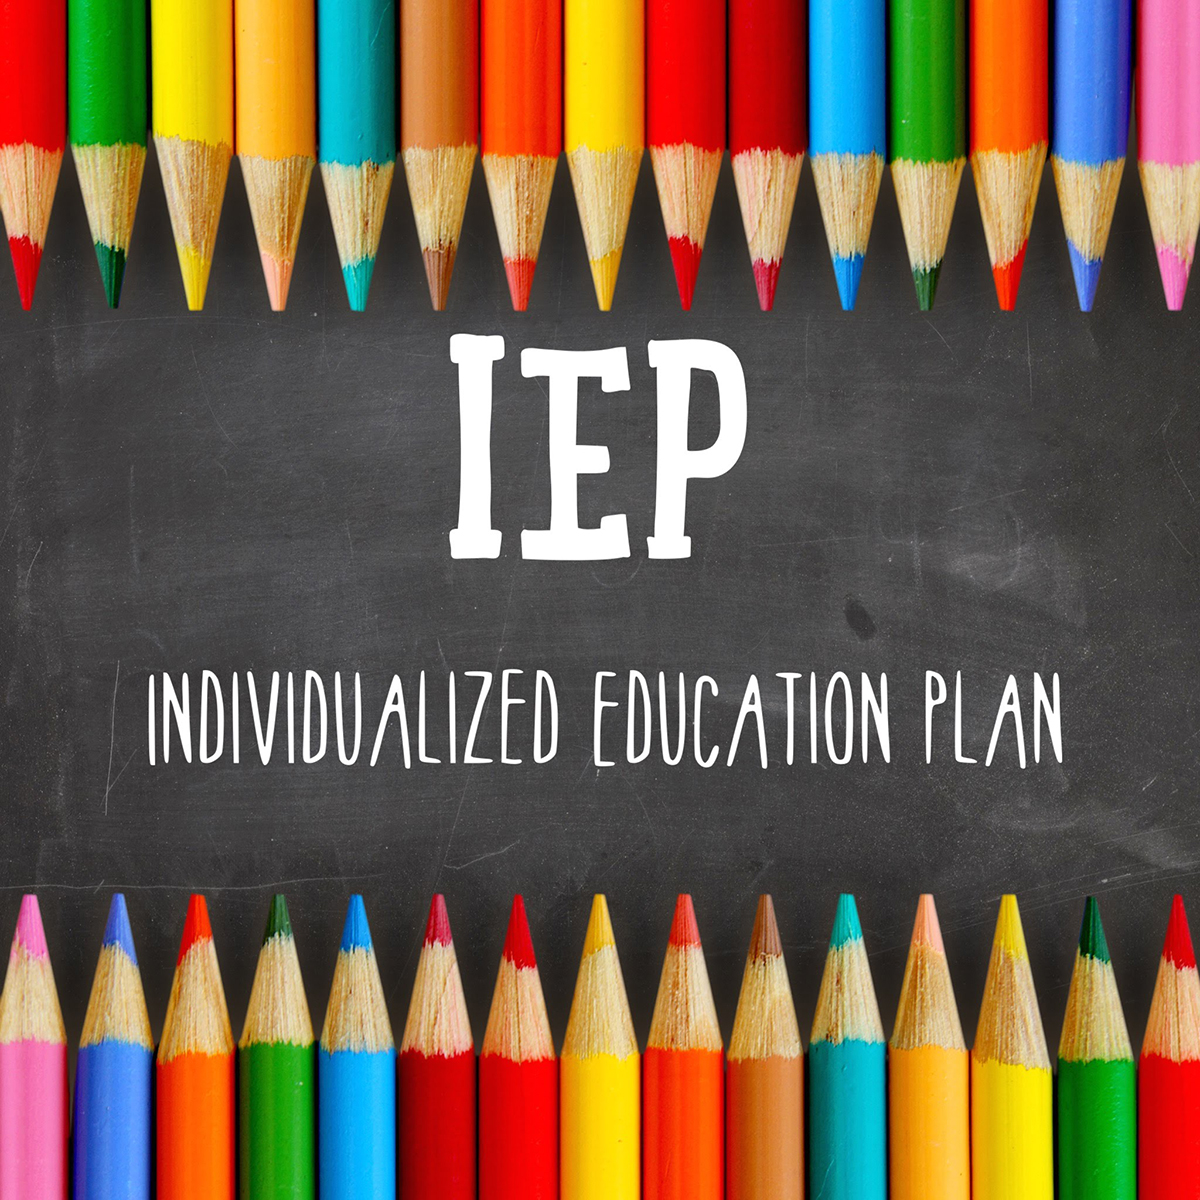 boarder of brightly colored pencils with text: "IEP Individualized Education Plan"